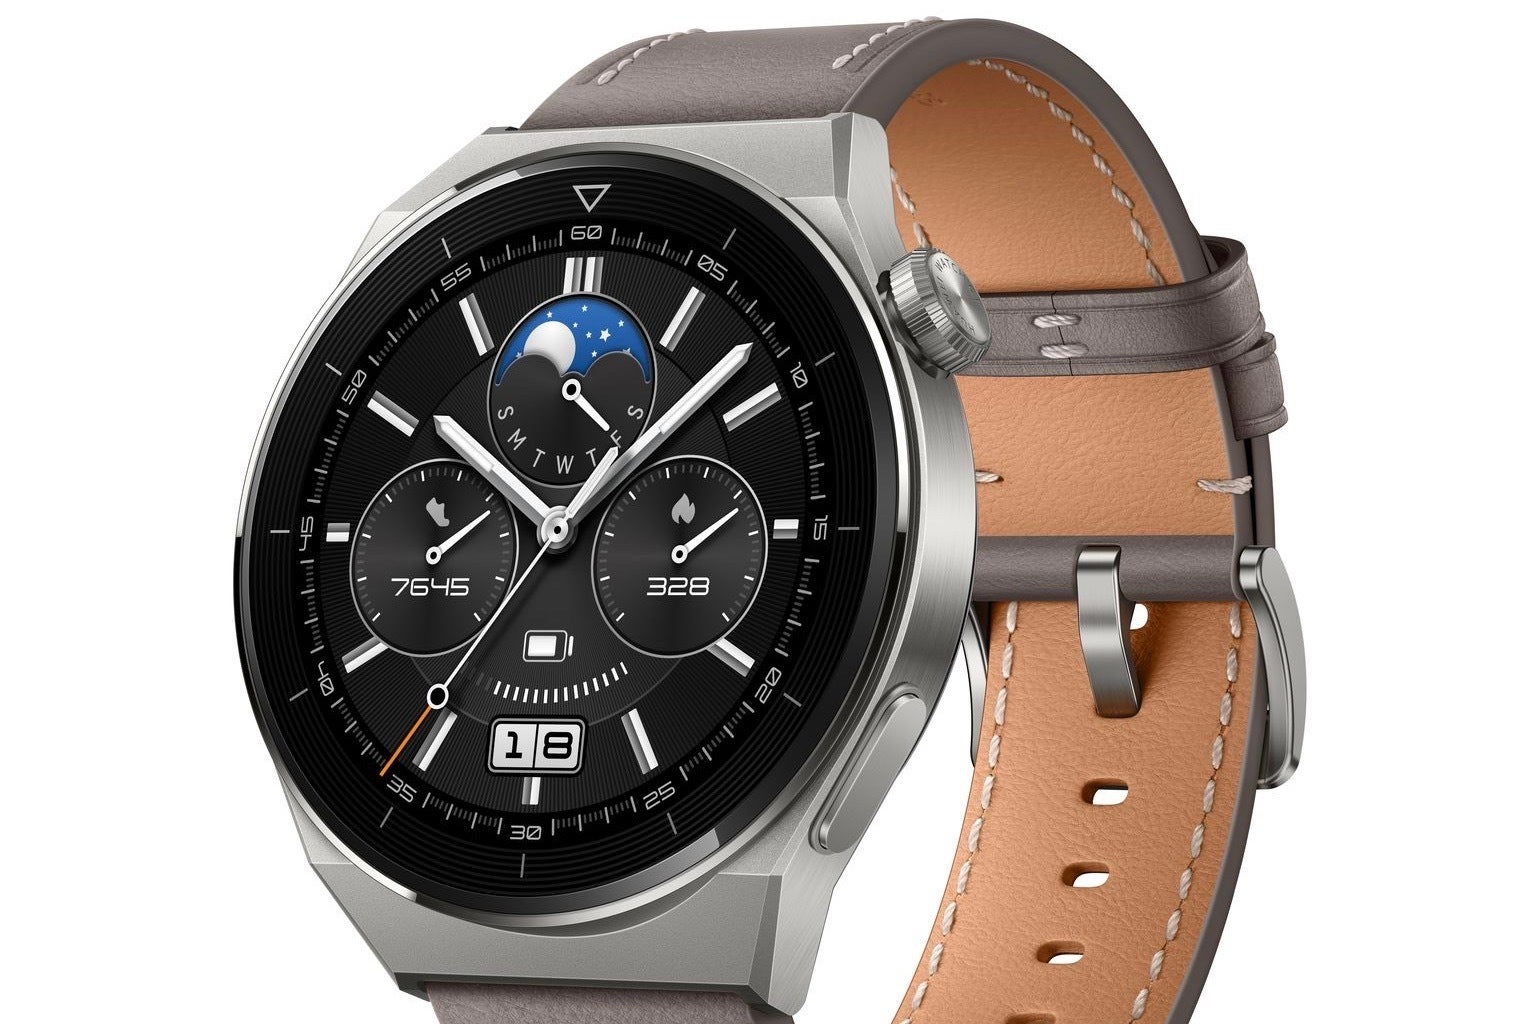 The Huawei Watch GT 3 Pro is official with a premium design and a 14-day battery